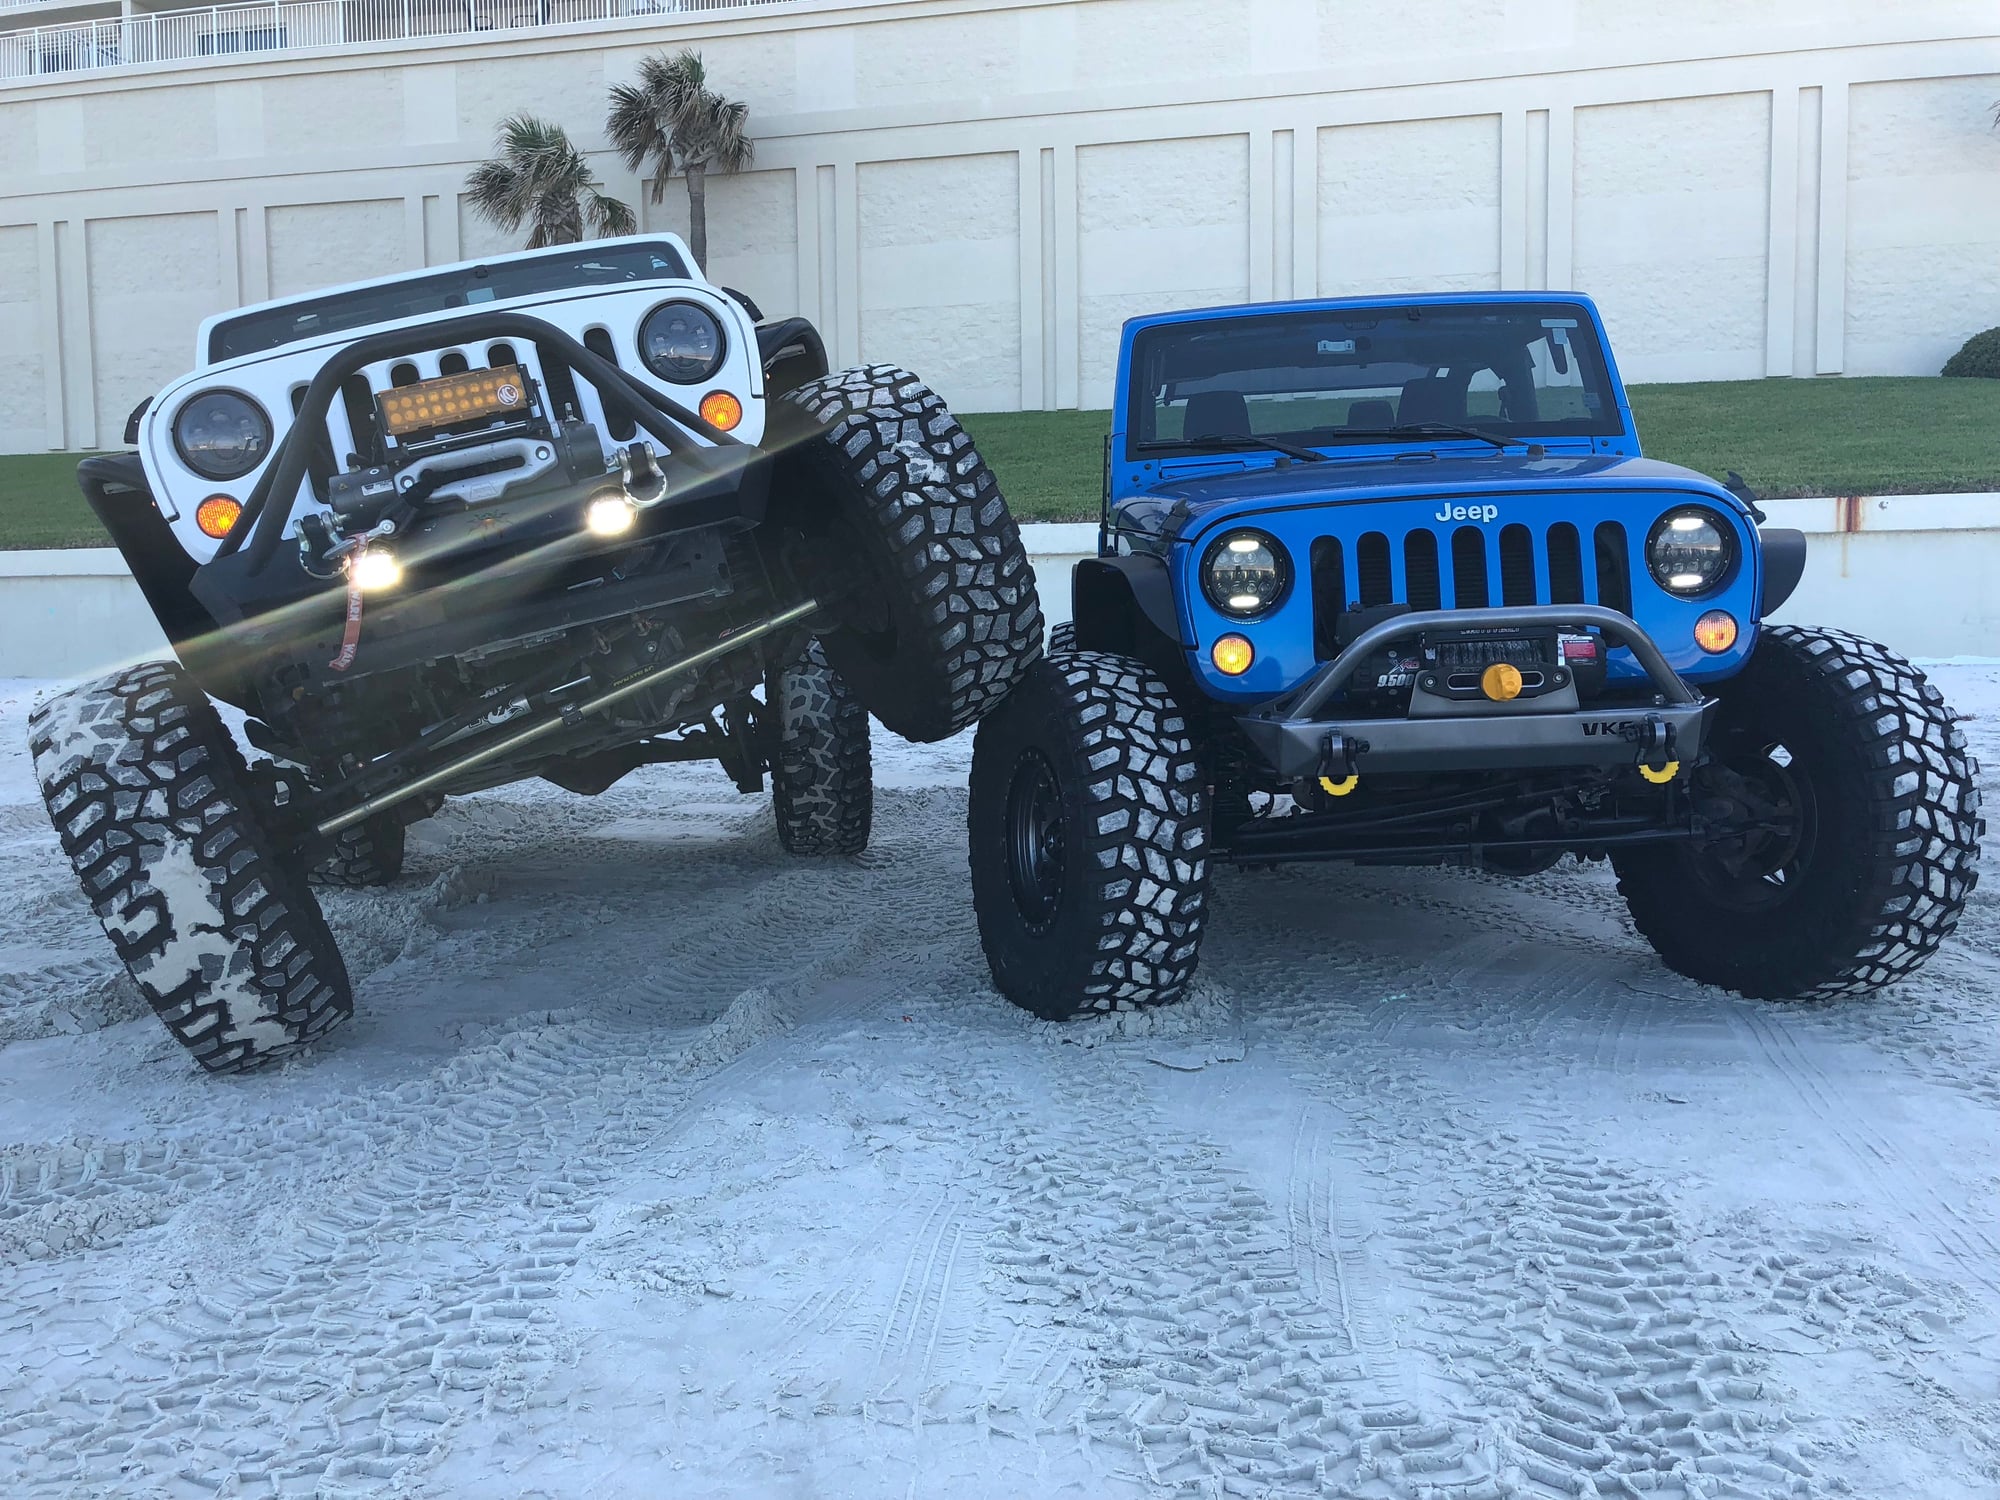 Wheels and Tires/Axles - DT prorock 44 unlmtd and Rubicon 44 rear both locked ARB air locker 4.88s - Used - 2007 to 2018 Jeep Wrangler - Wellington, FL 33449, United States